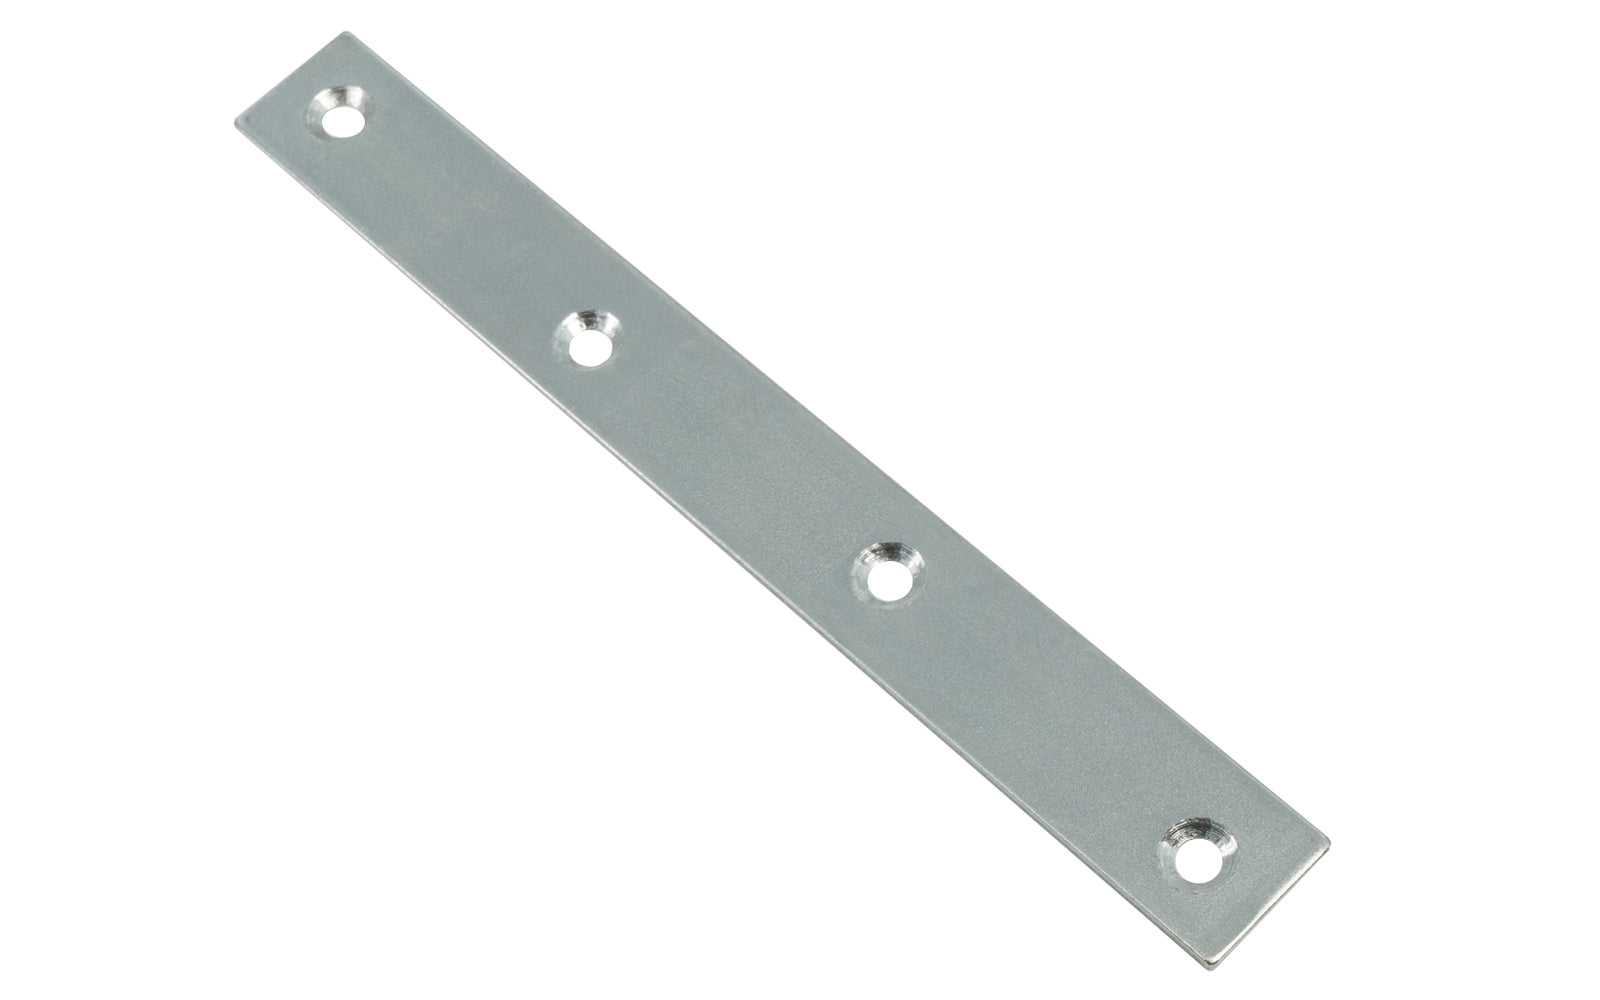 8" Zinc-Plated Mending Plate. These flat mending plate irons are designed for furniture, cabinets, shelving support, etc. Allows for quick & easy repair of items in the workshop, home, & other applications. Made of steel material with a zinc plated finish. Countersunk holes. 8" long size.  Screws not included.